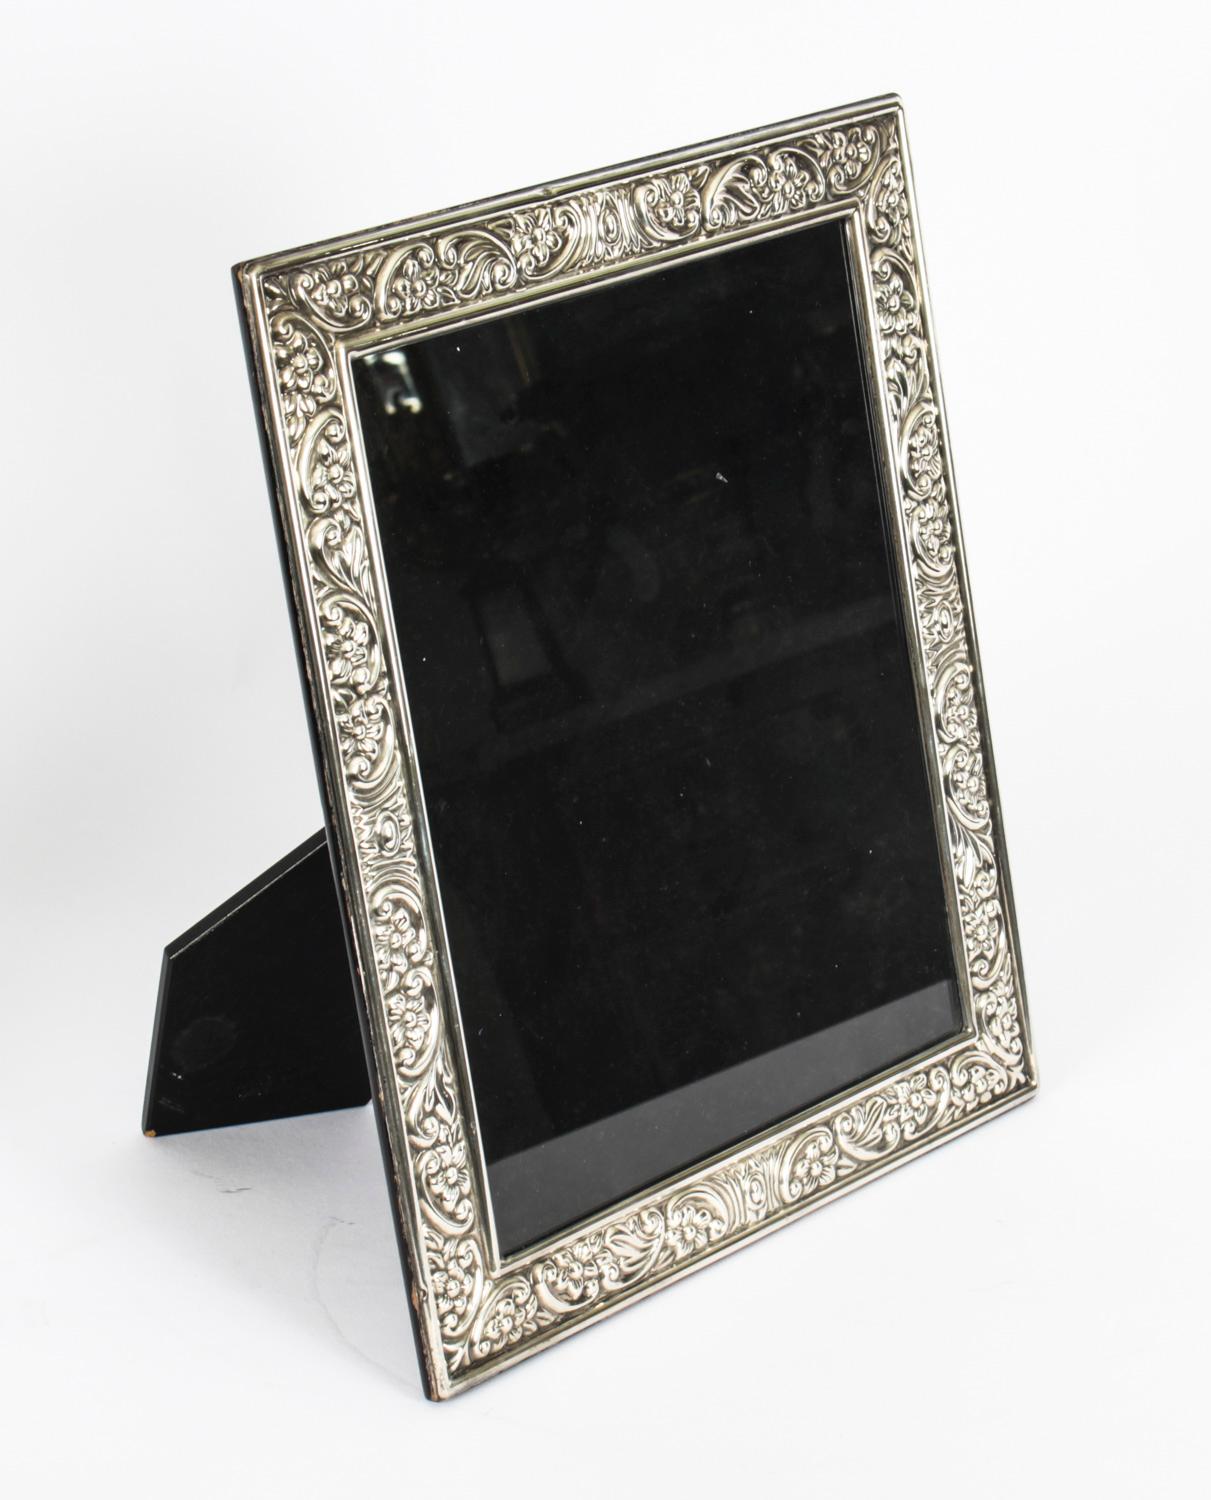 A truly superb large decorative sterling silver photo frame Carrs of Sheffield with the date marks for 1997.

Beautifully decorated with floral and scroll relief borders and with an ebonised wooden back.

An excellent gift idea for many